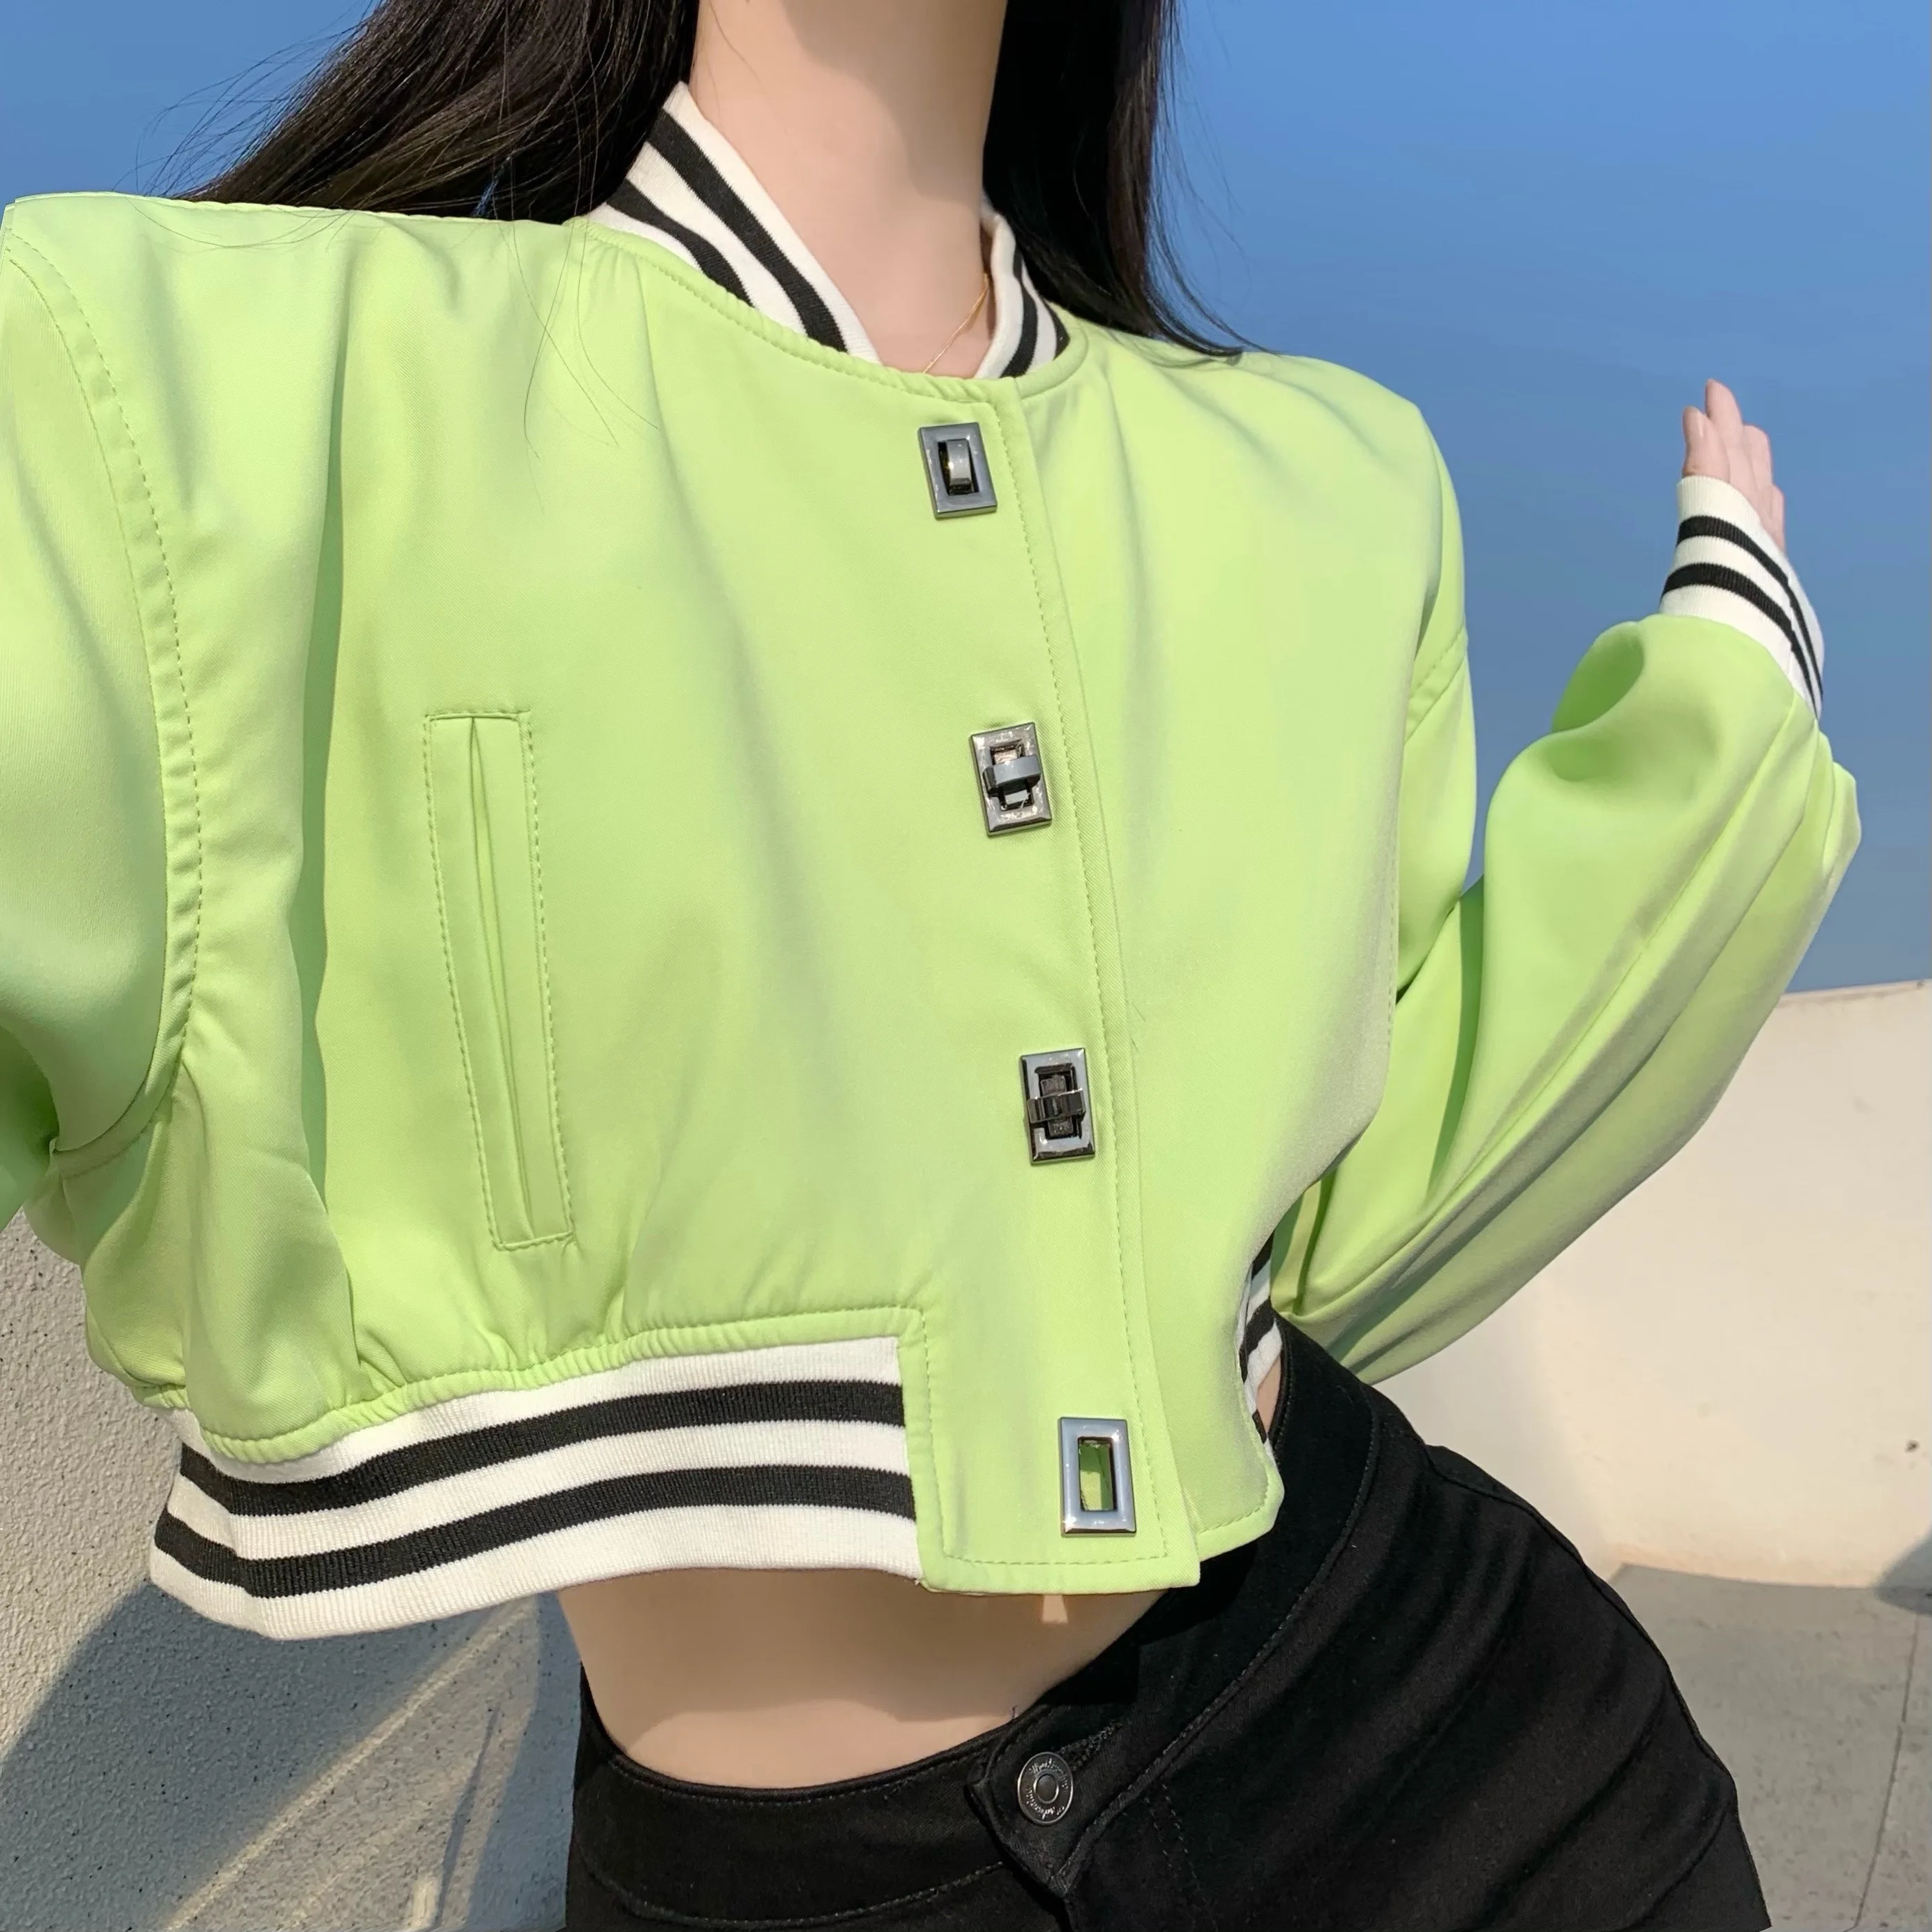 Spring Autumn Long Sleeve Streetwear Crop Jacket For Women Chic Female Baseball Outwear Lady Casual Sporty Short Jacket Top women sunscreen bomber jacket casual lady cardigan baseball uniform new style youth simple easy matching spring autumn ins tops